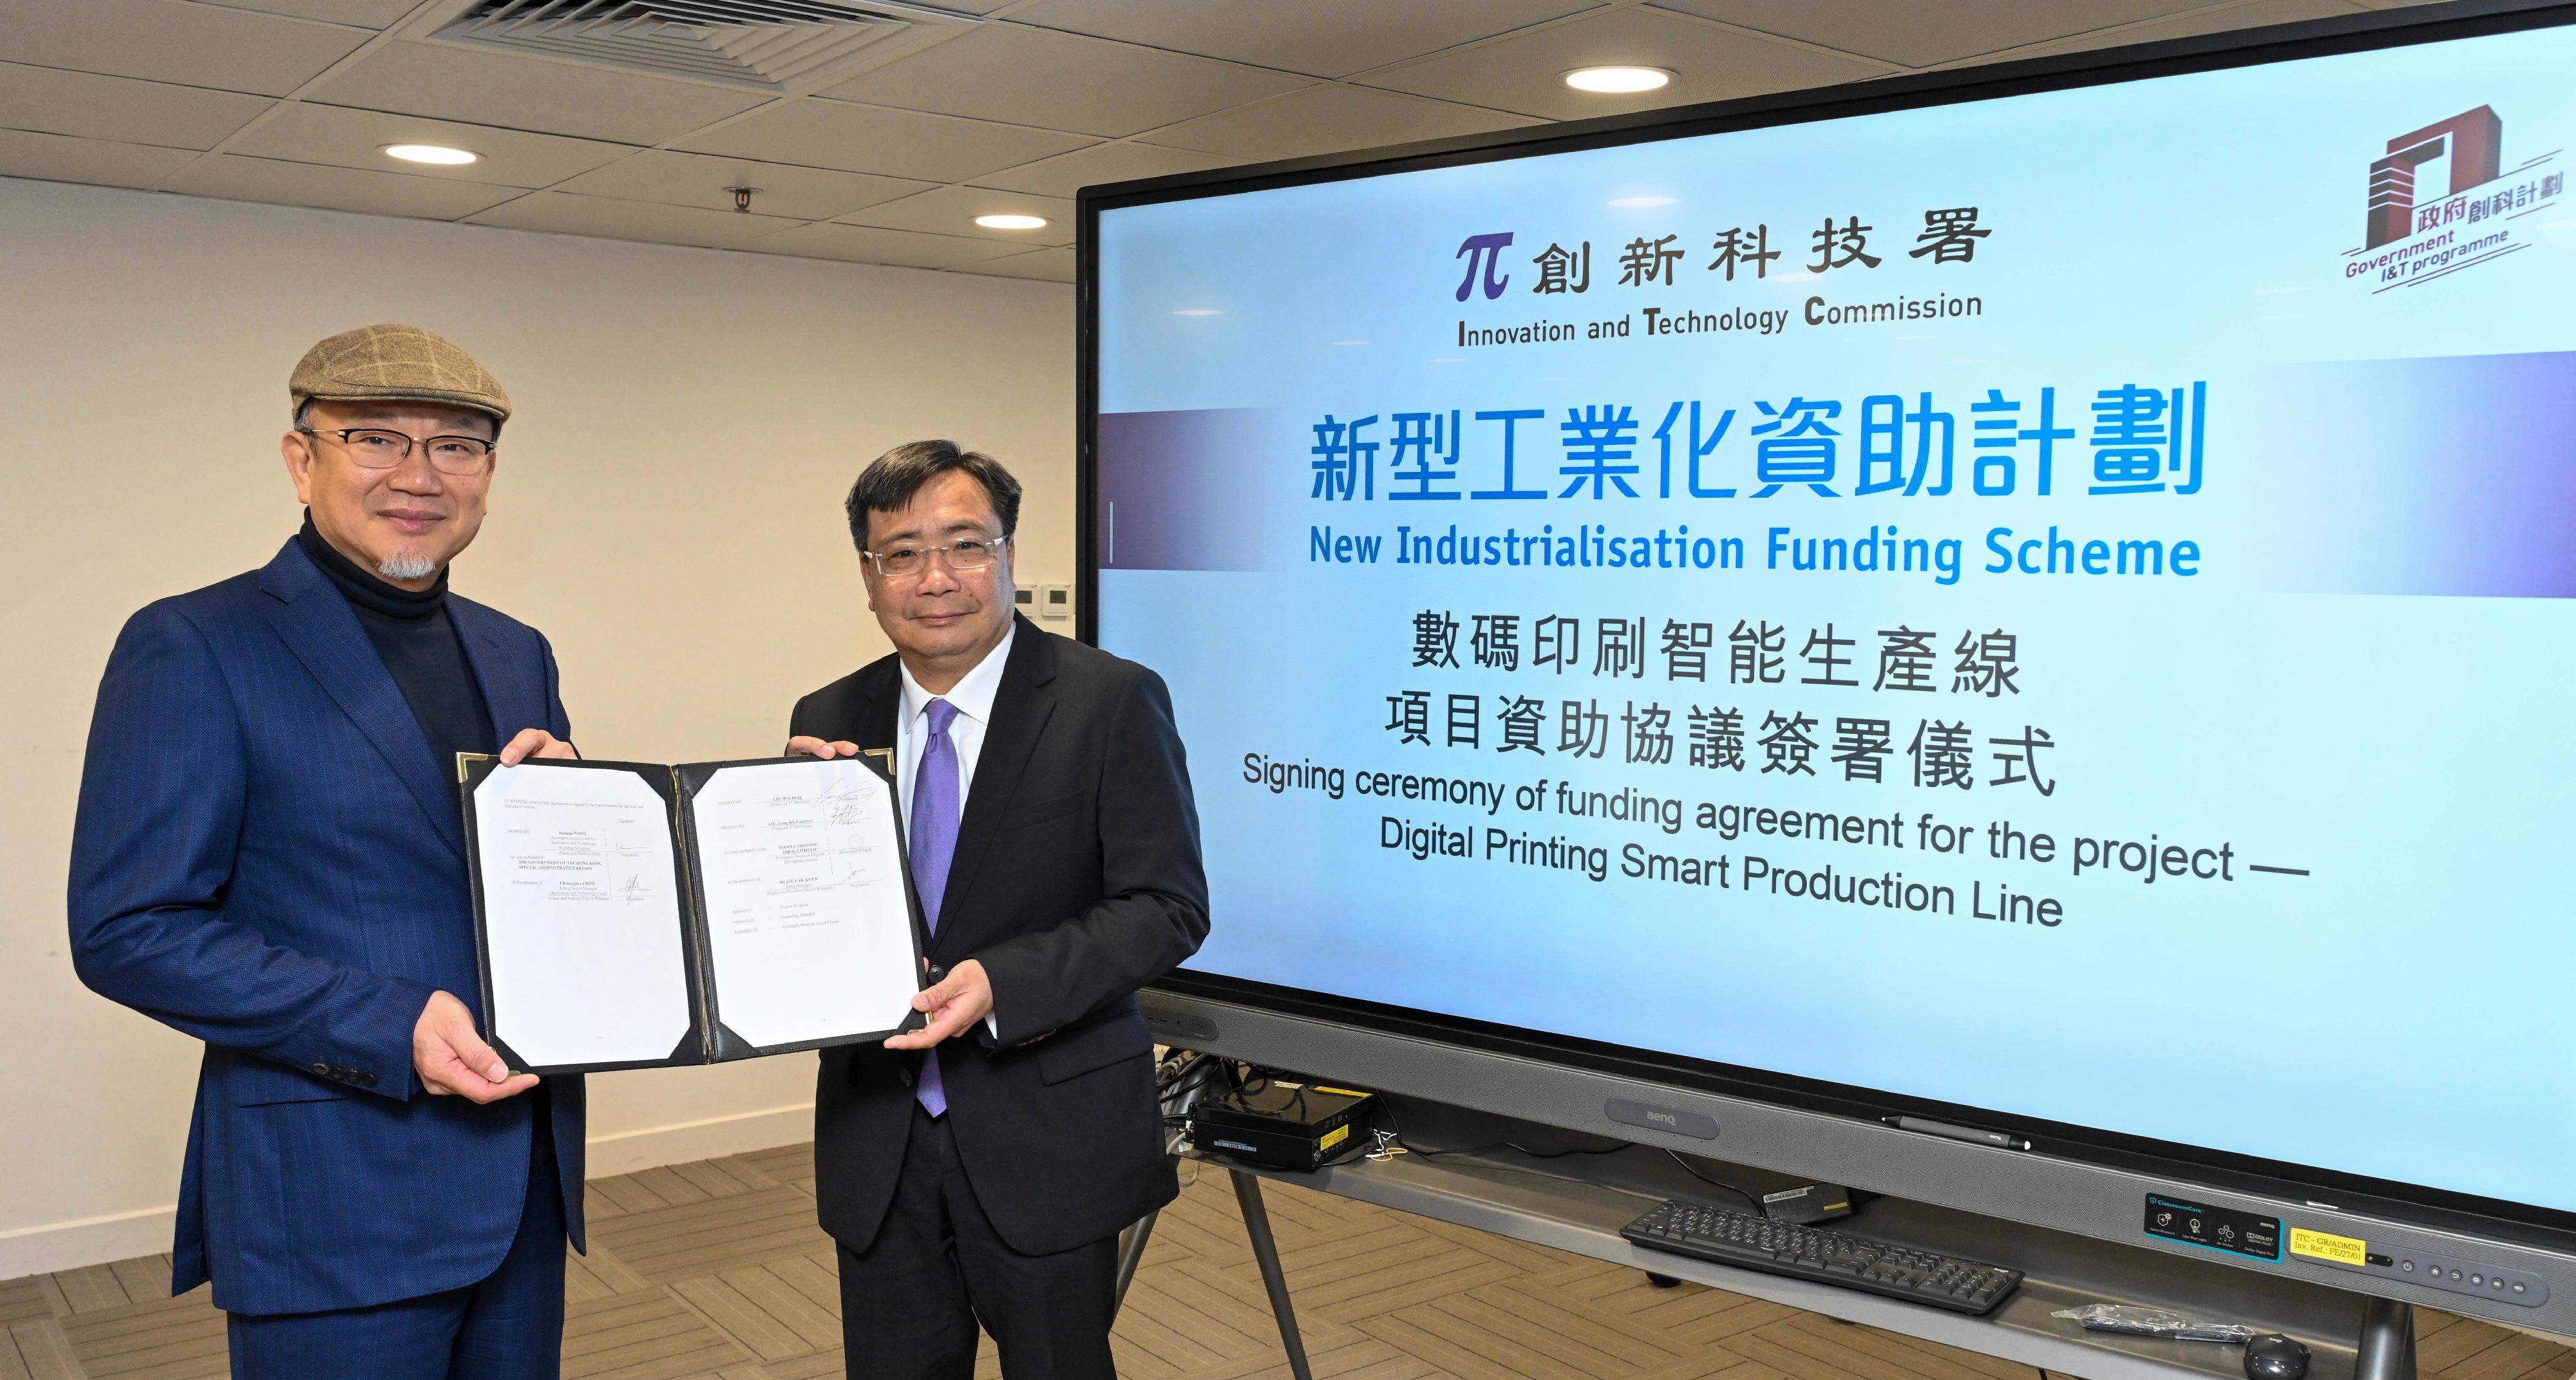 The New Industrialisation Funding Scheme has approved funding for a project by People Printing Press Limited to set up a smart production line for digital printing. Photo shows the Commissioner for Innovation and Technology, Mr Ivan Lee (right), and the Director of People Printing Press Limited, Mr Liu Wai-hung (left), attending the signing ceremony of the funding agreement today (January 30).
